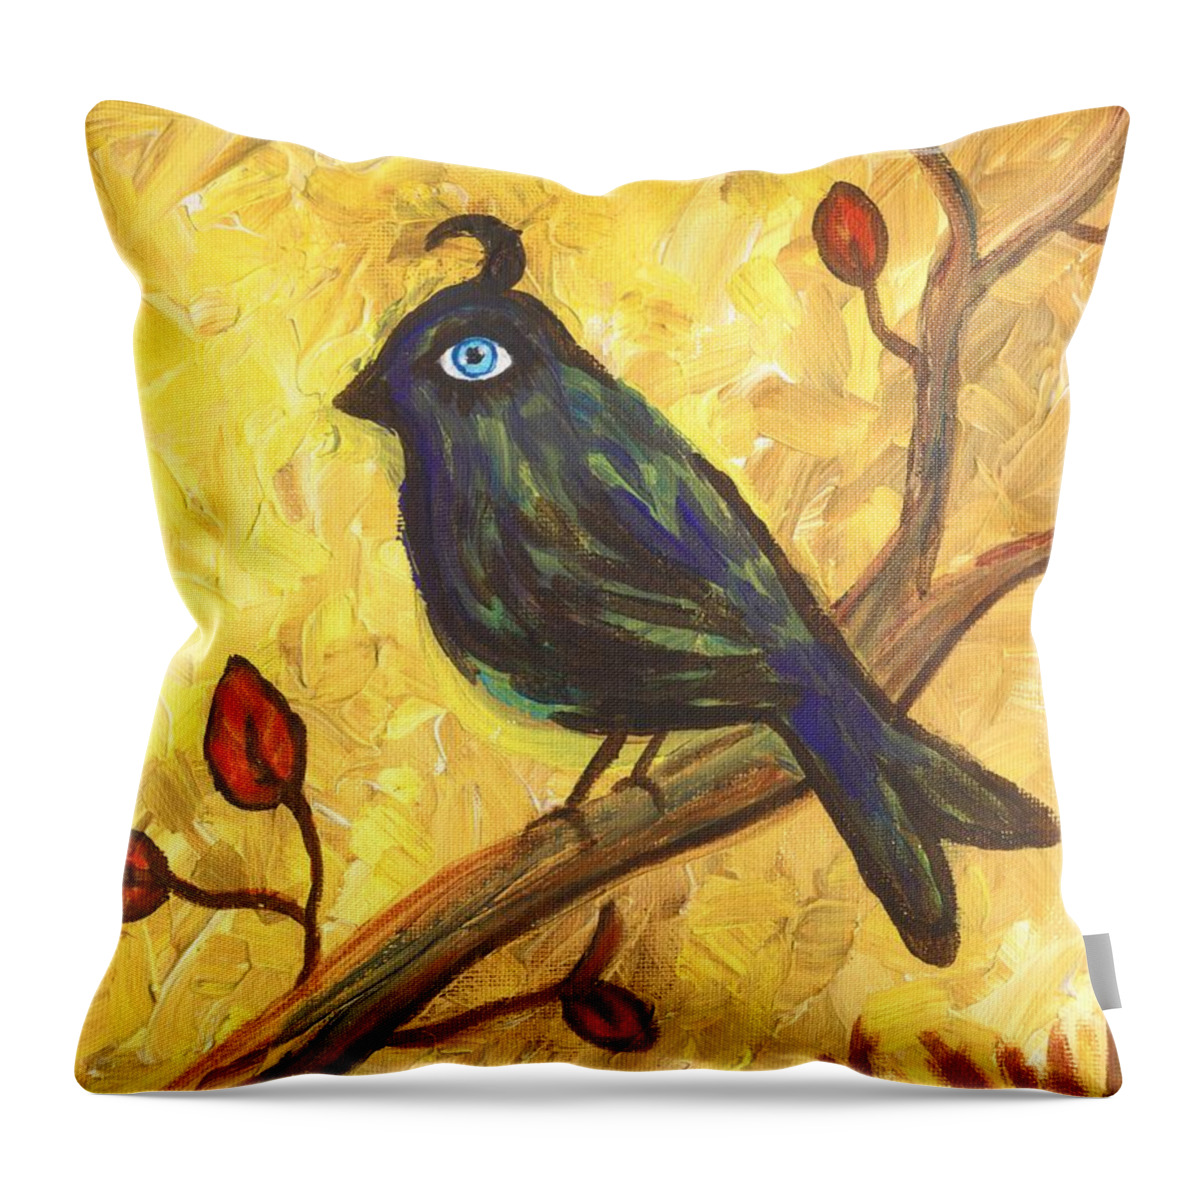 Bird Throw Pillow featuring the painting Observant Bird 101 by Linda Mears